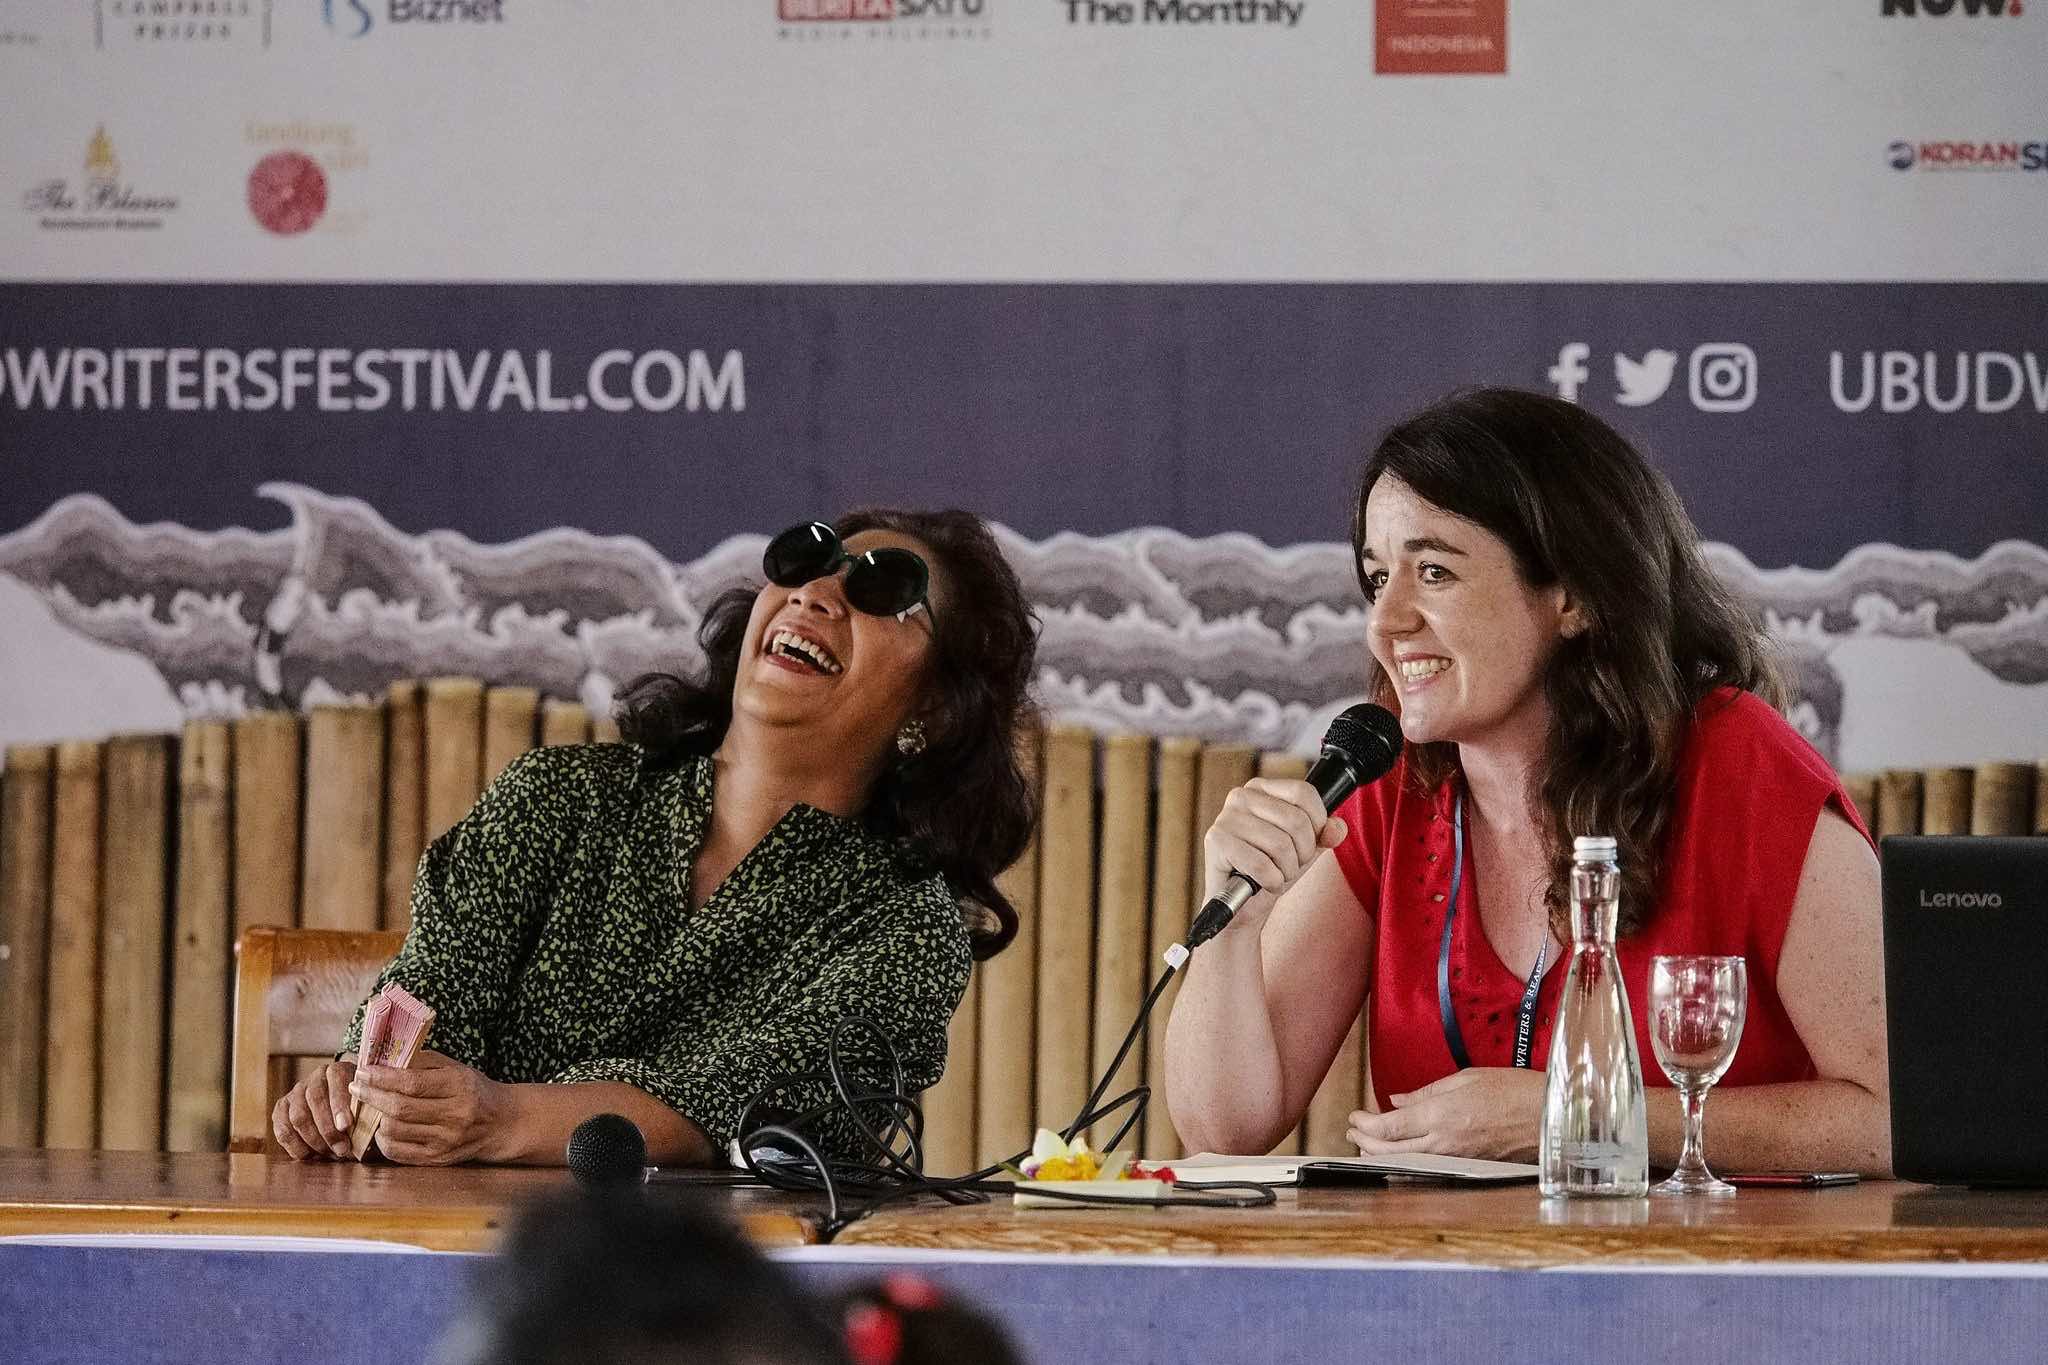 Maritime Affairs and Fisheries Minister Susi Pudjiastuti was a speaker at the 2018 Ubud Writers and Readers Festival. Here, she is photographed with BBC Journalist Rebecca Henschke. Photo: UWRF 